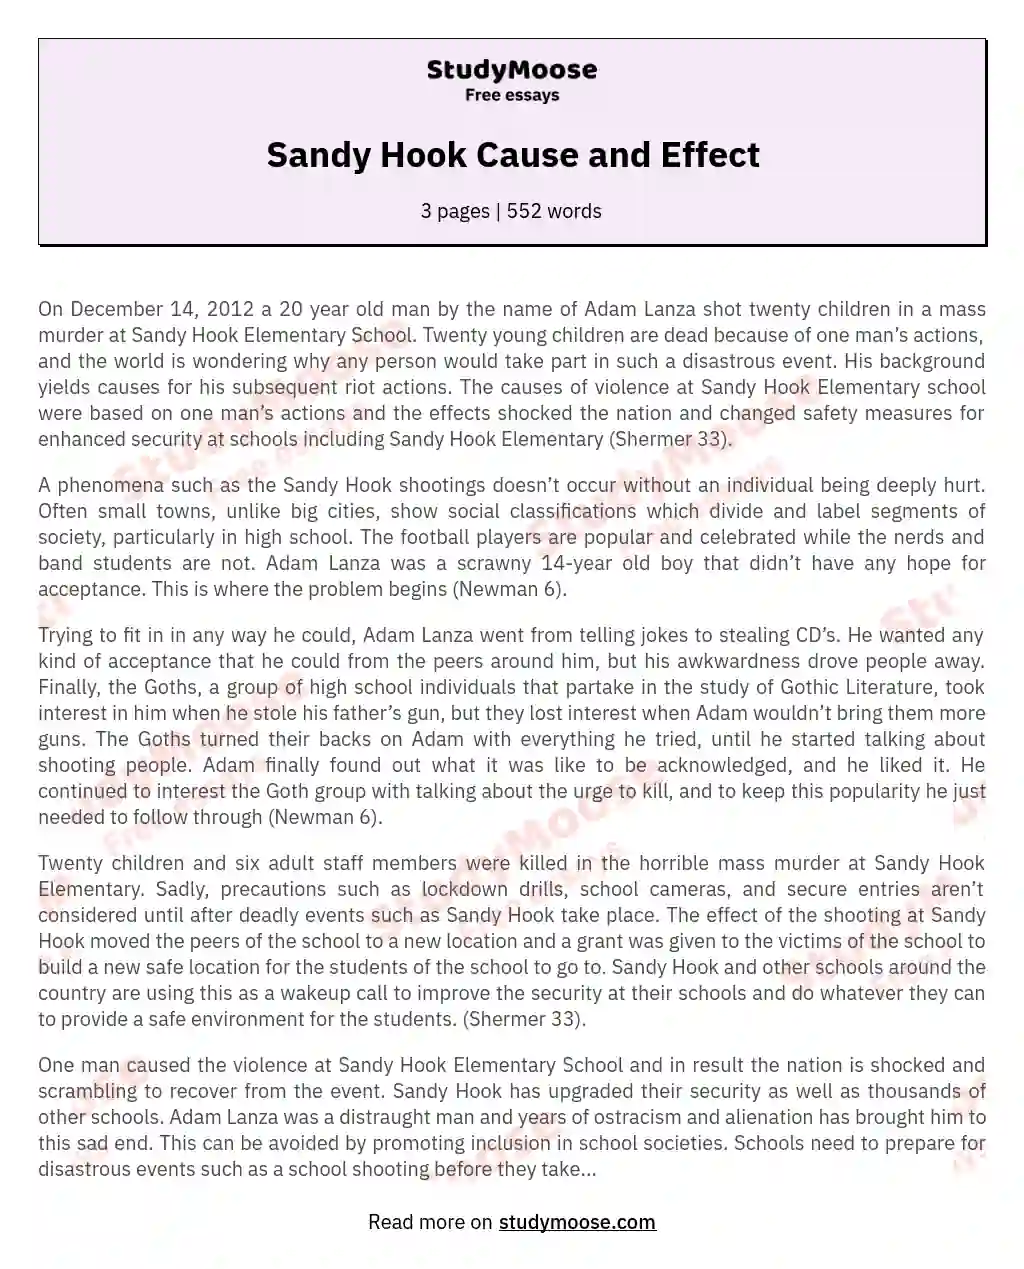 Sandy Hook Cause and Effect essay